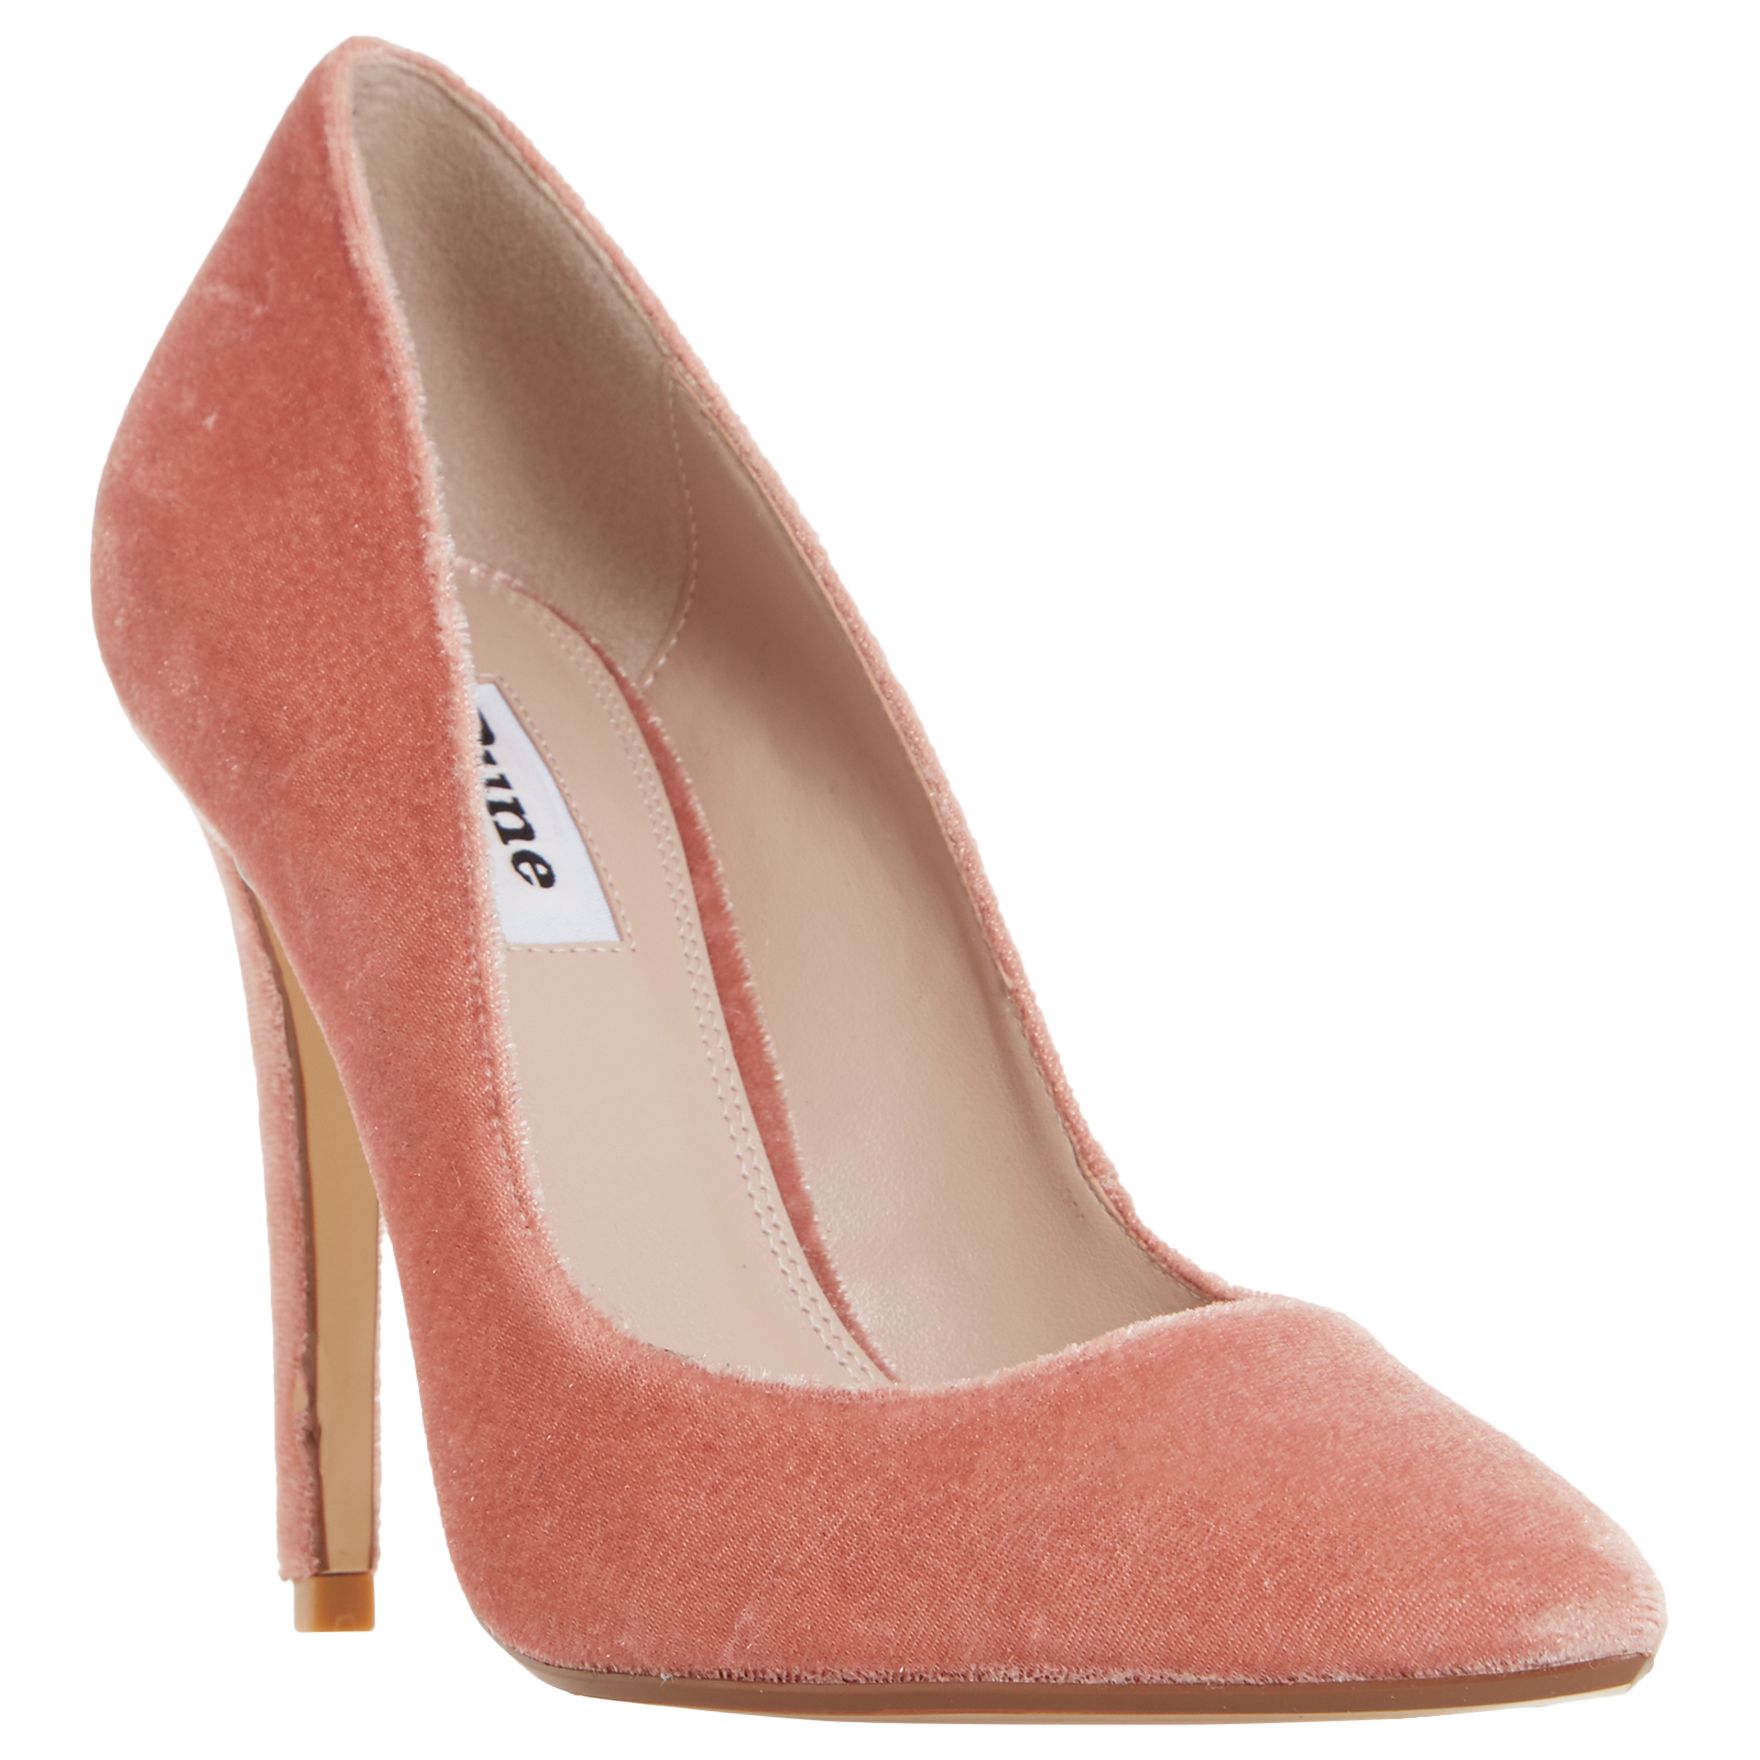 Dune Aiyana Pointed Toe Court Shoes, Blush, 8